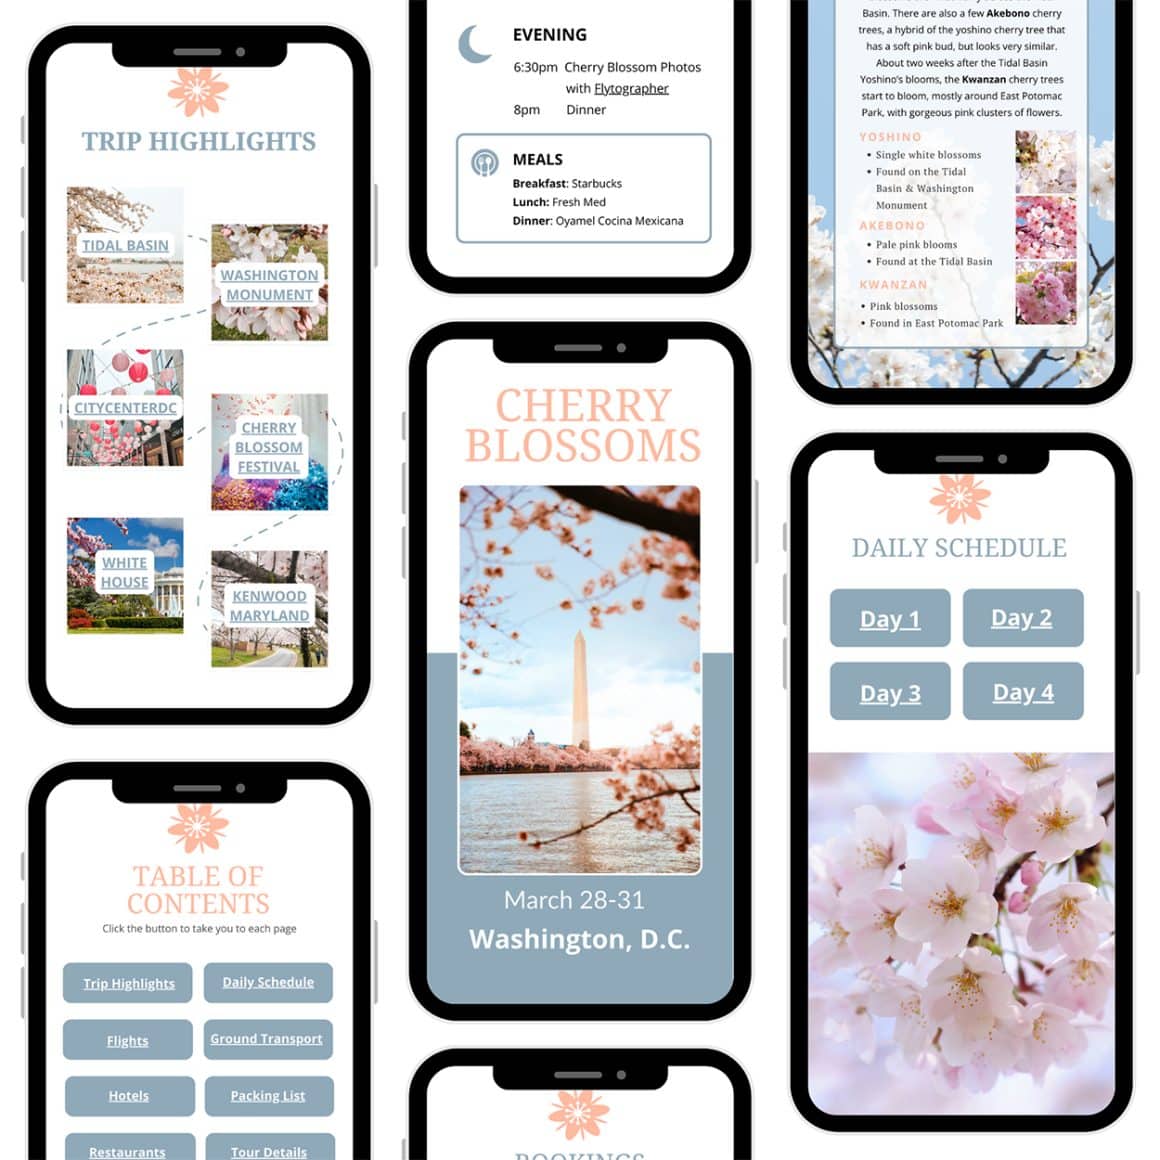 Washington DC Cherry Blossom Digital Travel Planner template for mobile created by Keryn Means DCTravelMag.com